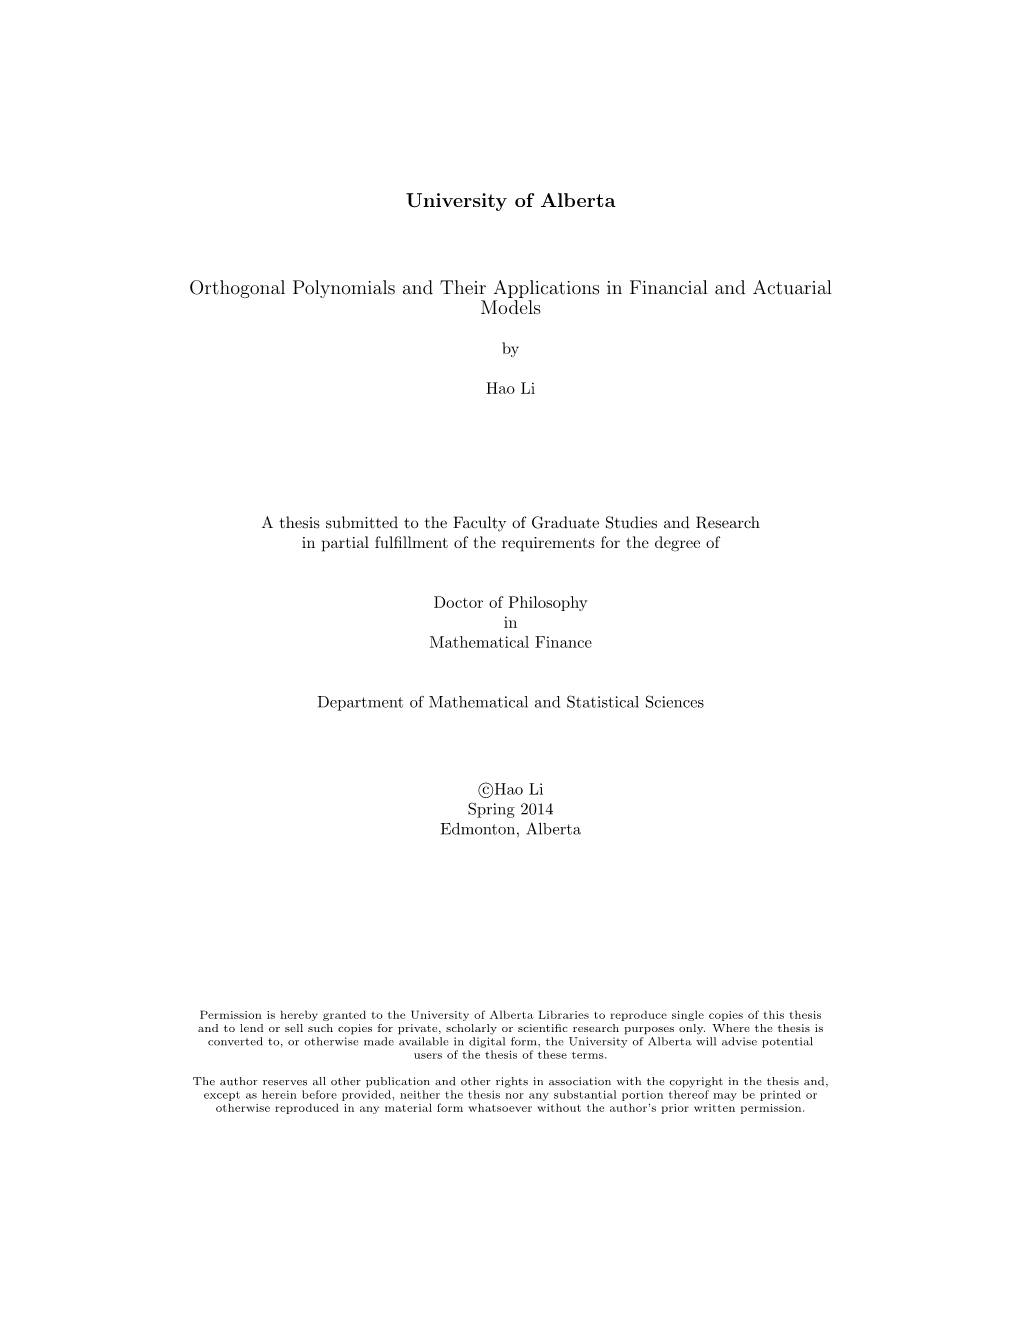 University of Alberta Orthogonal Polynomials and Their Applications